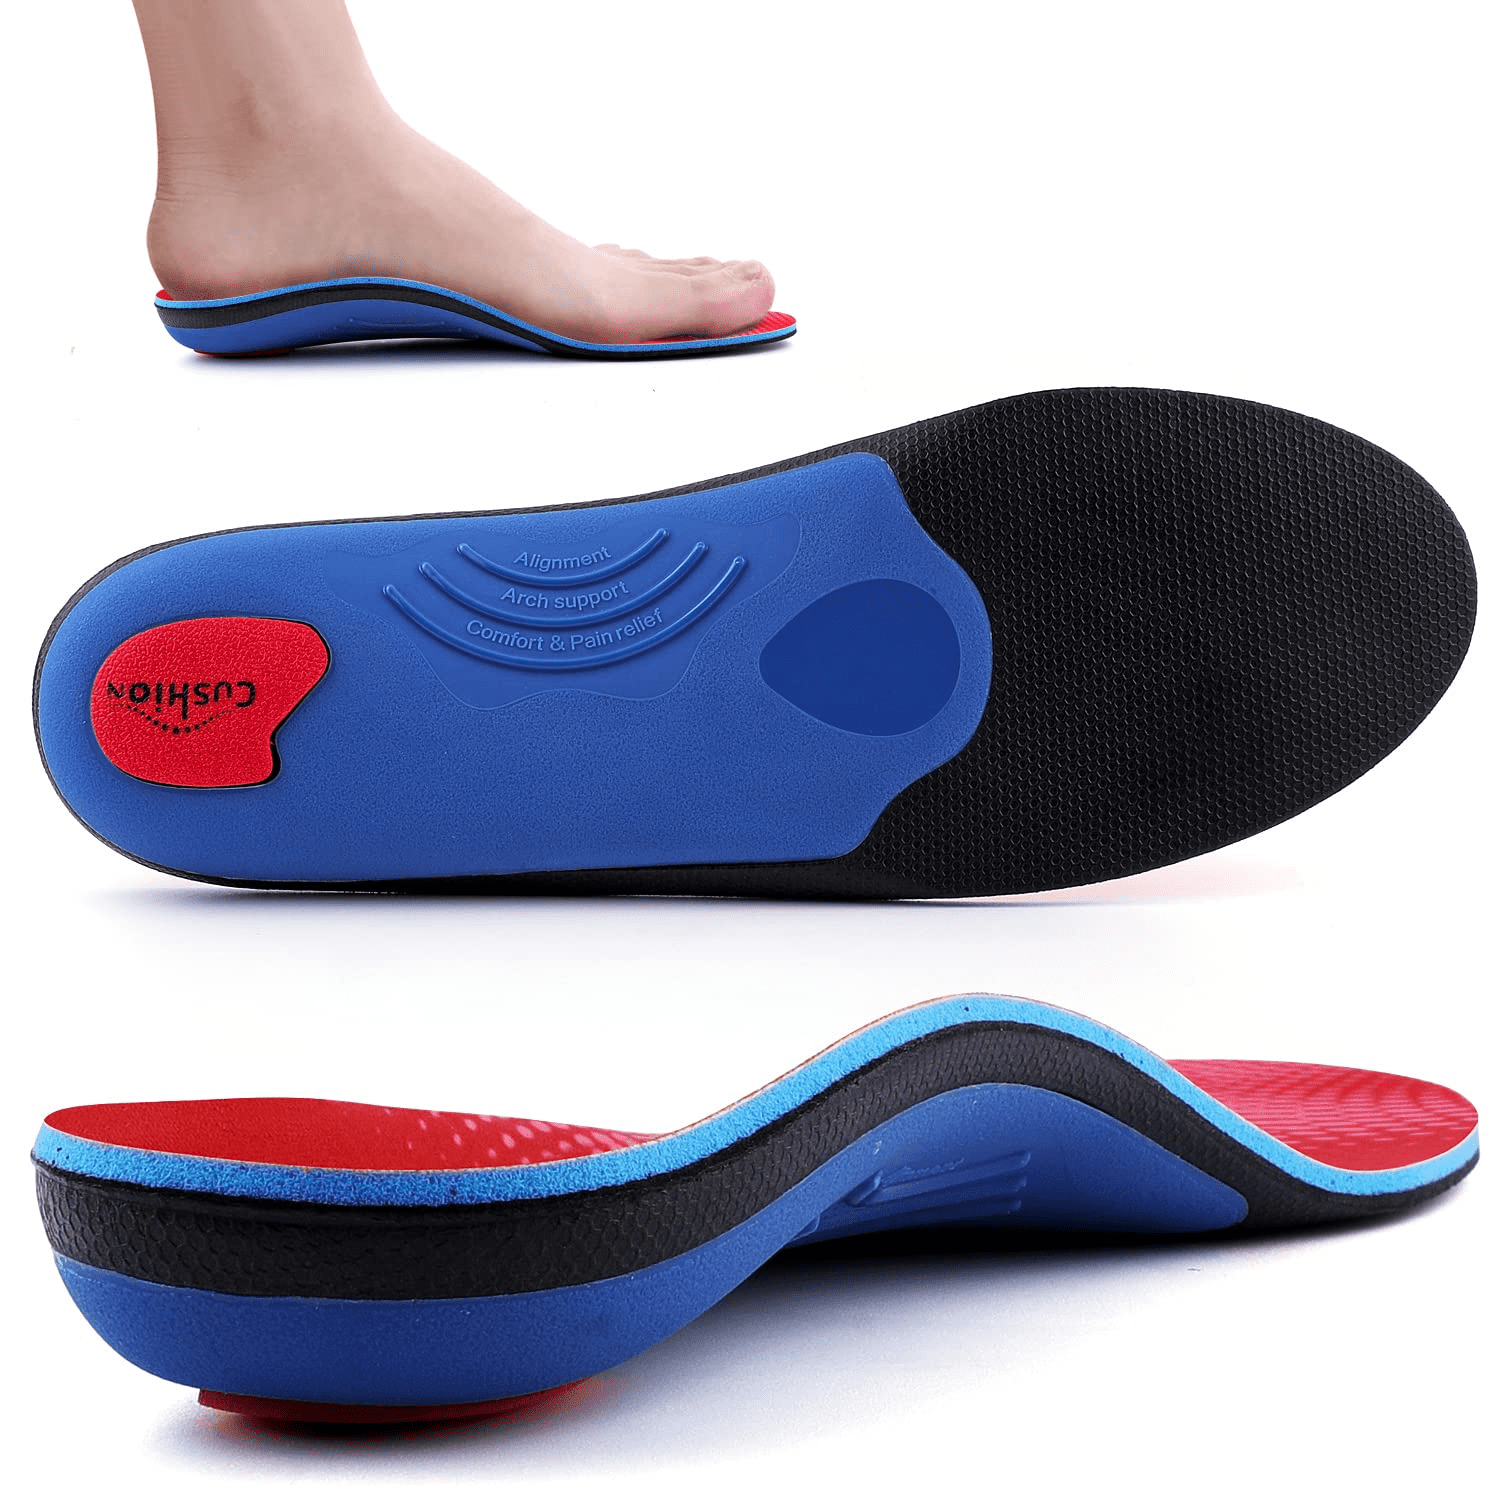 Full Length Metatarsal Mid Arch Support with Shock Absorption Orthotics Insoles,Insert for Flat Feet,Plantar Fasciitis and Heel Pain for Men and Women,Suitable for Athletic and Work Shoes 